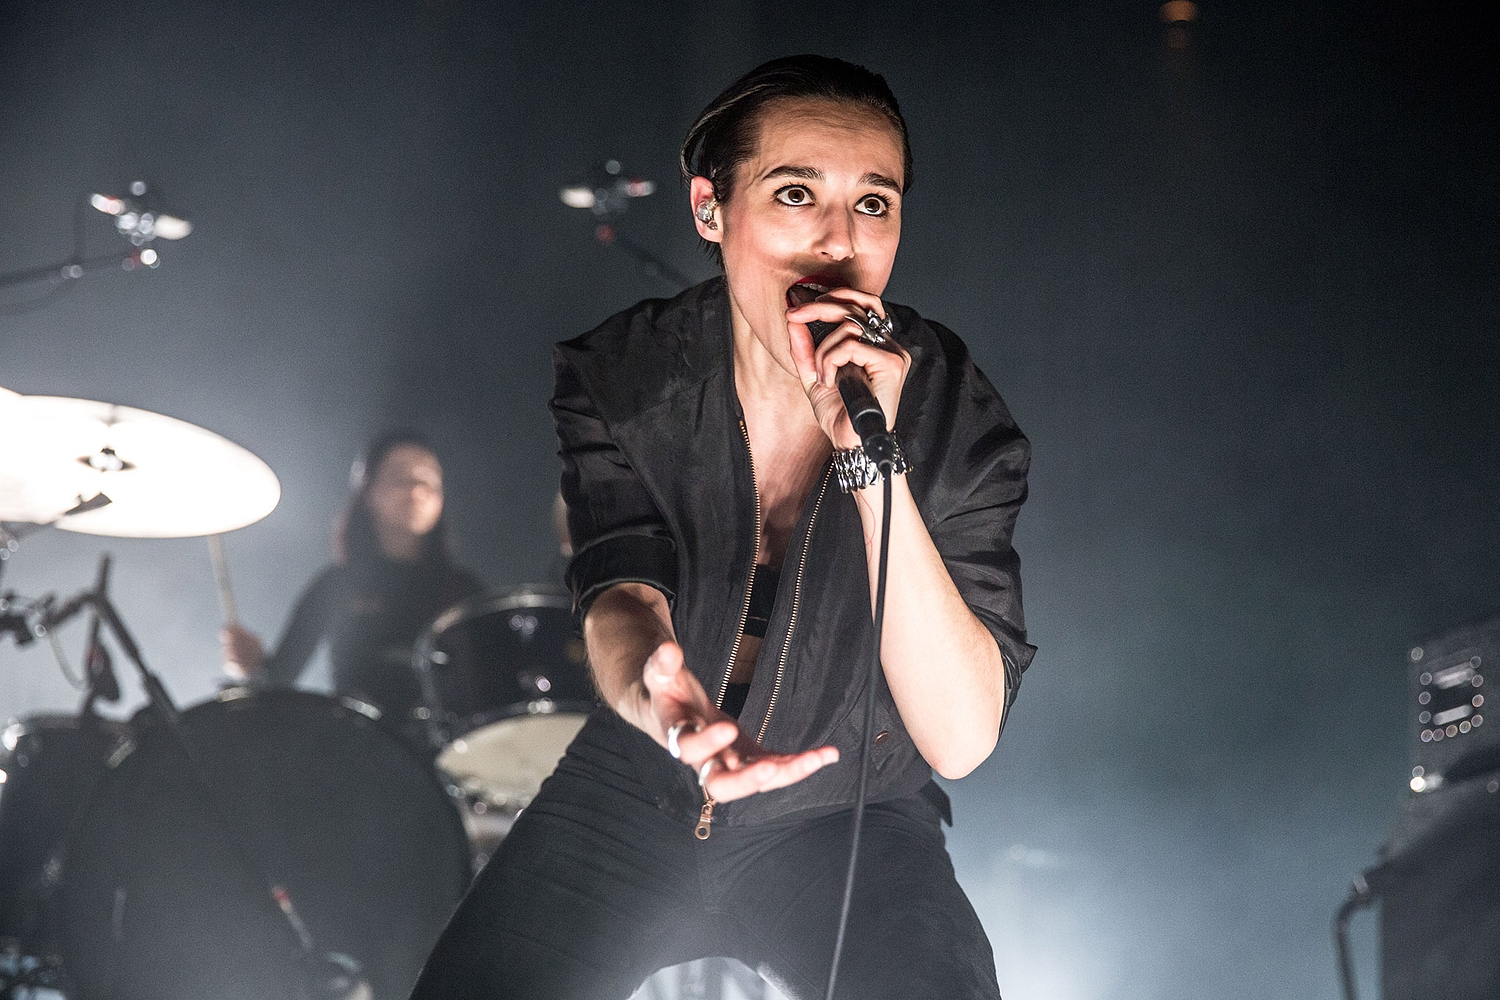 Savages’ Jehnny Beth has her own Beats 1 show